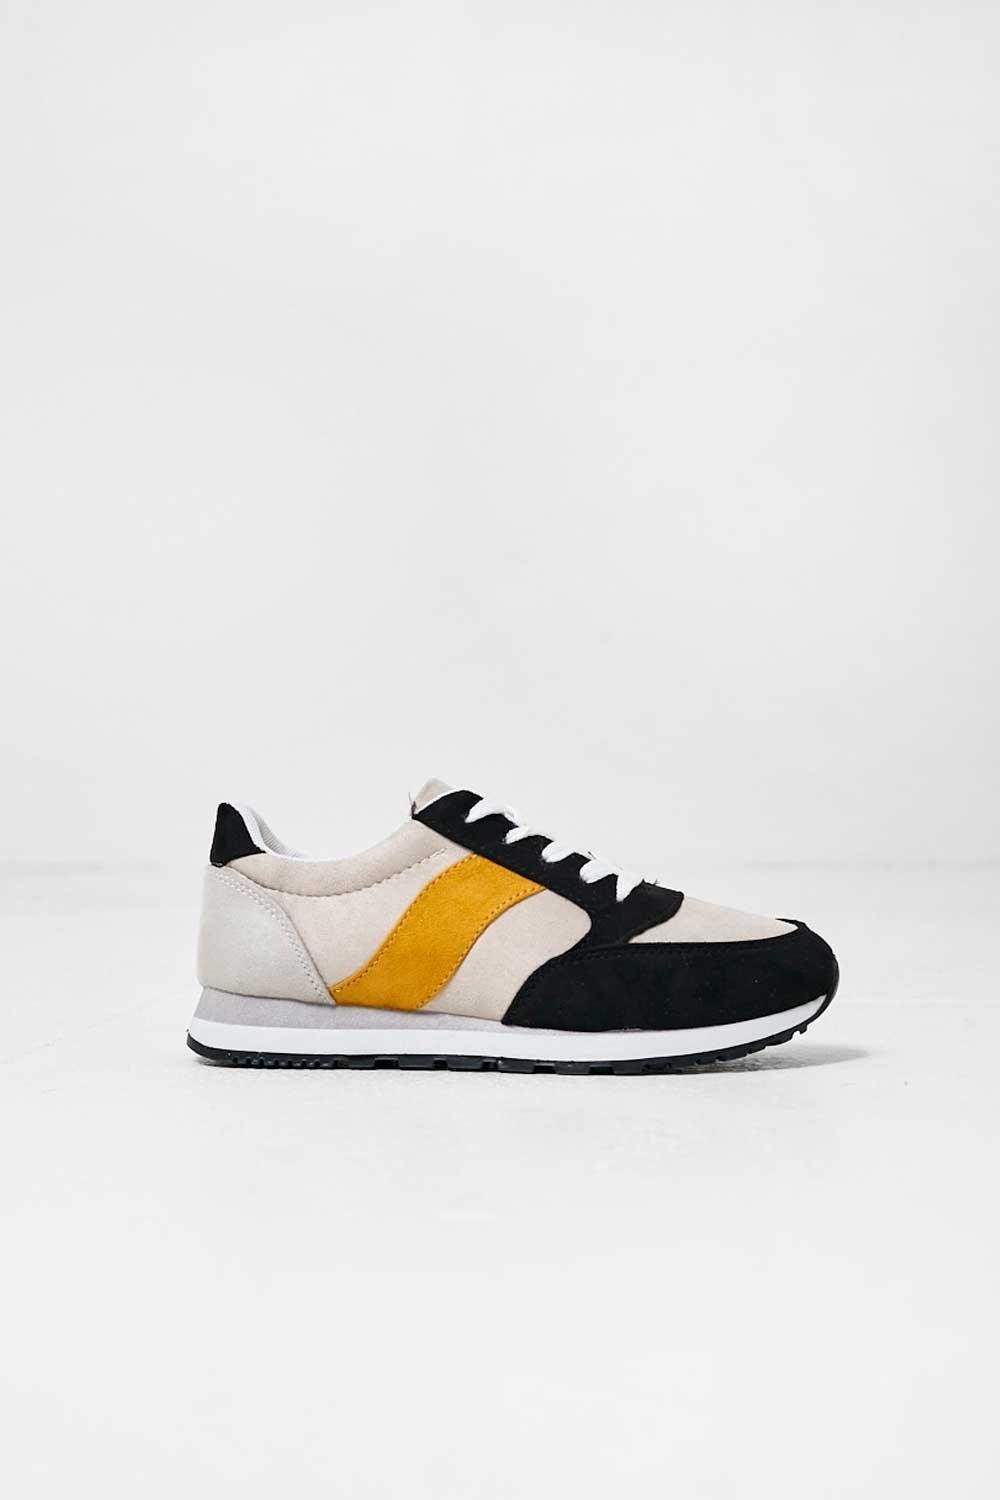 No Doubt Cece Colour Block Trainers in Beige | iCLOTHING